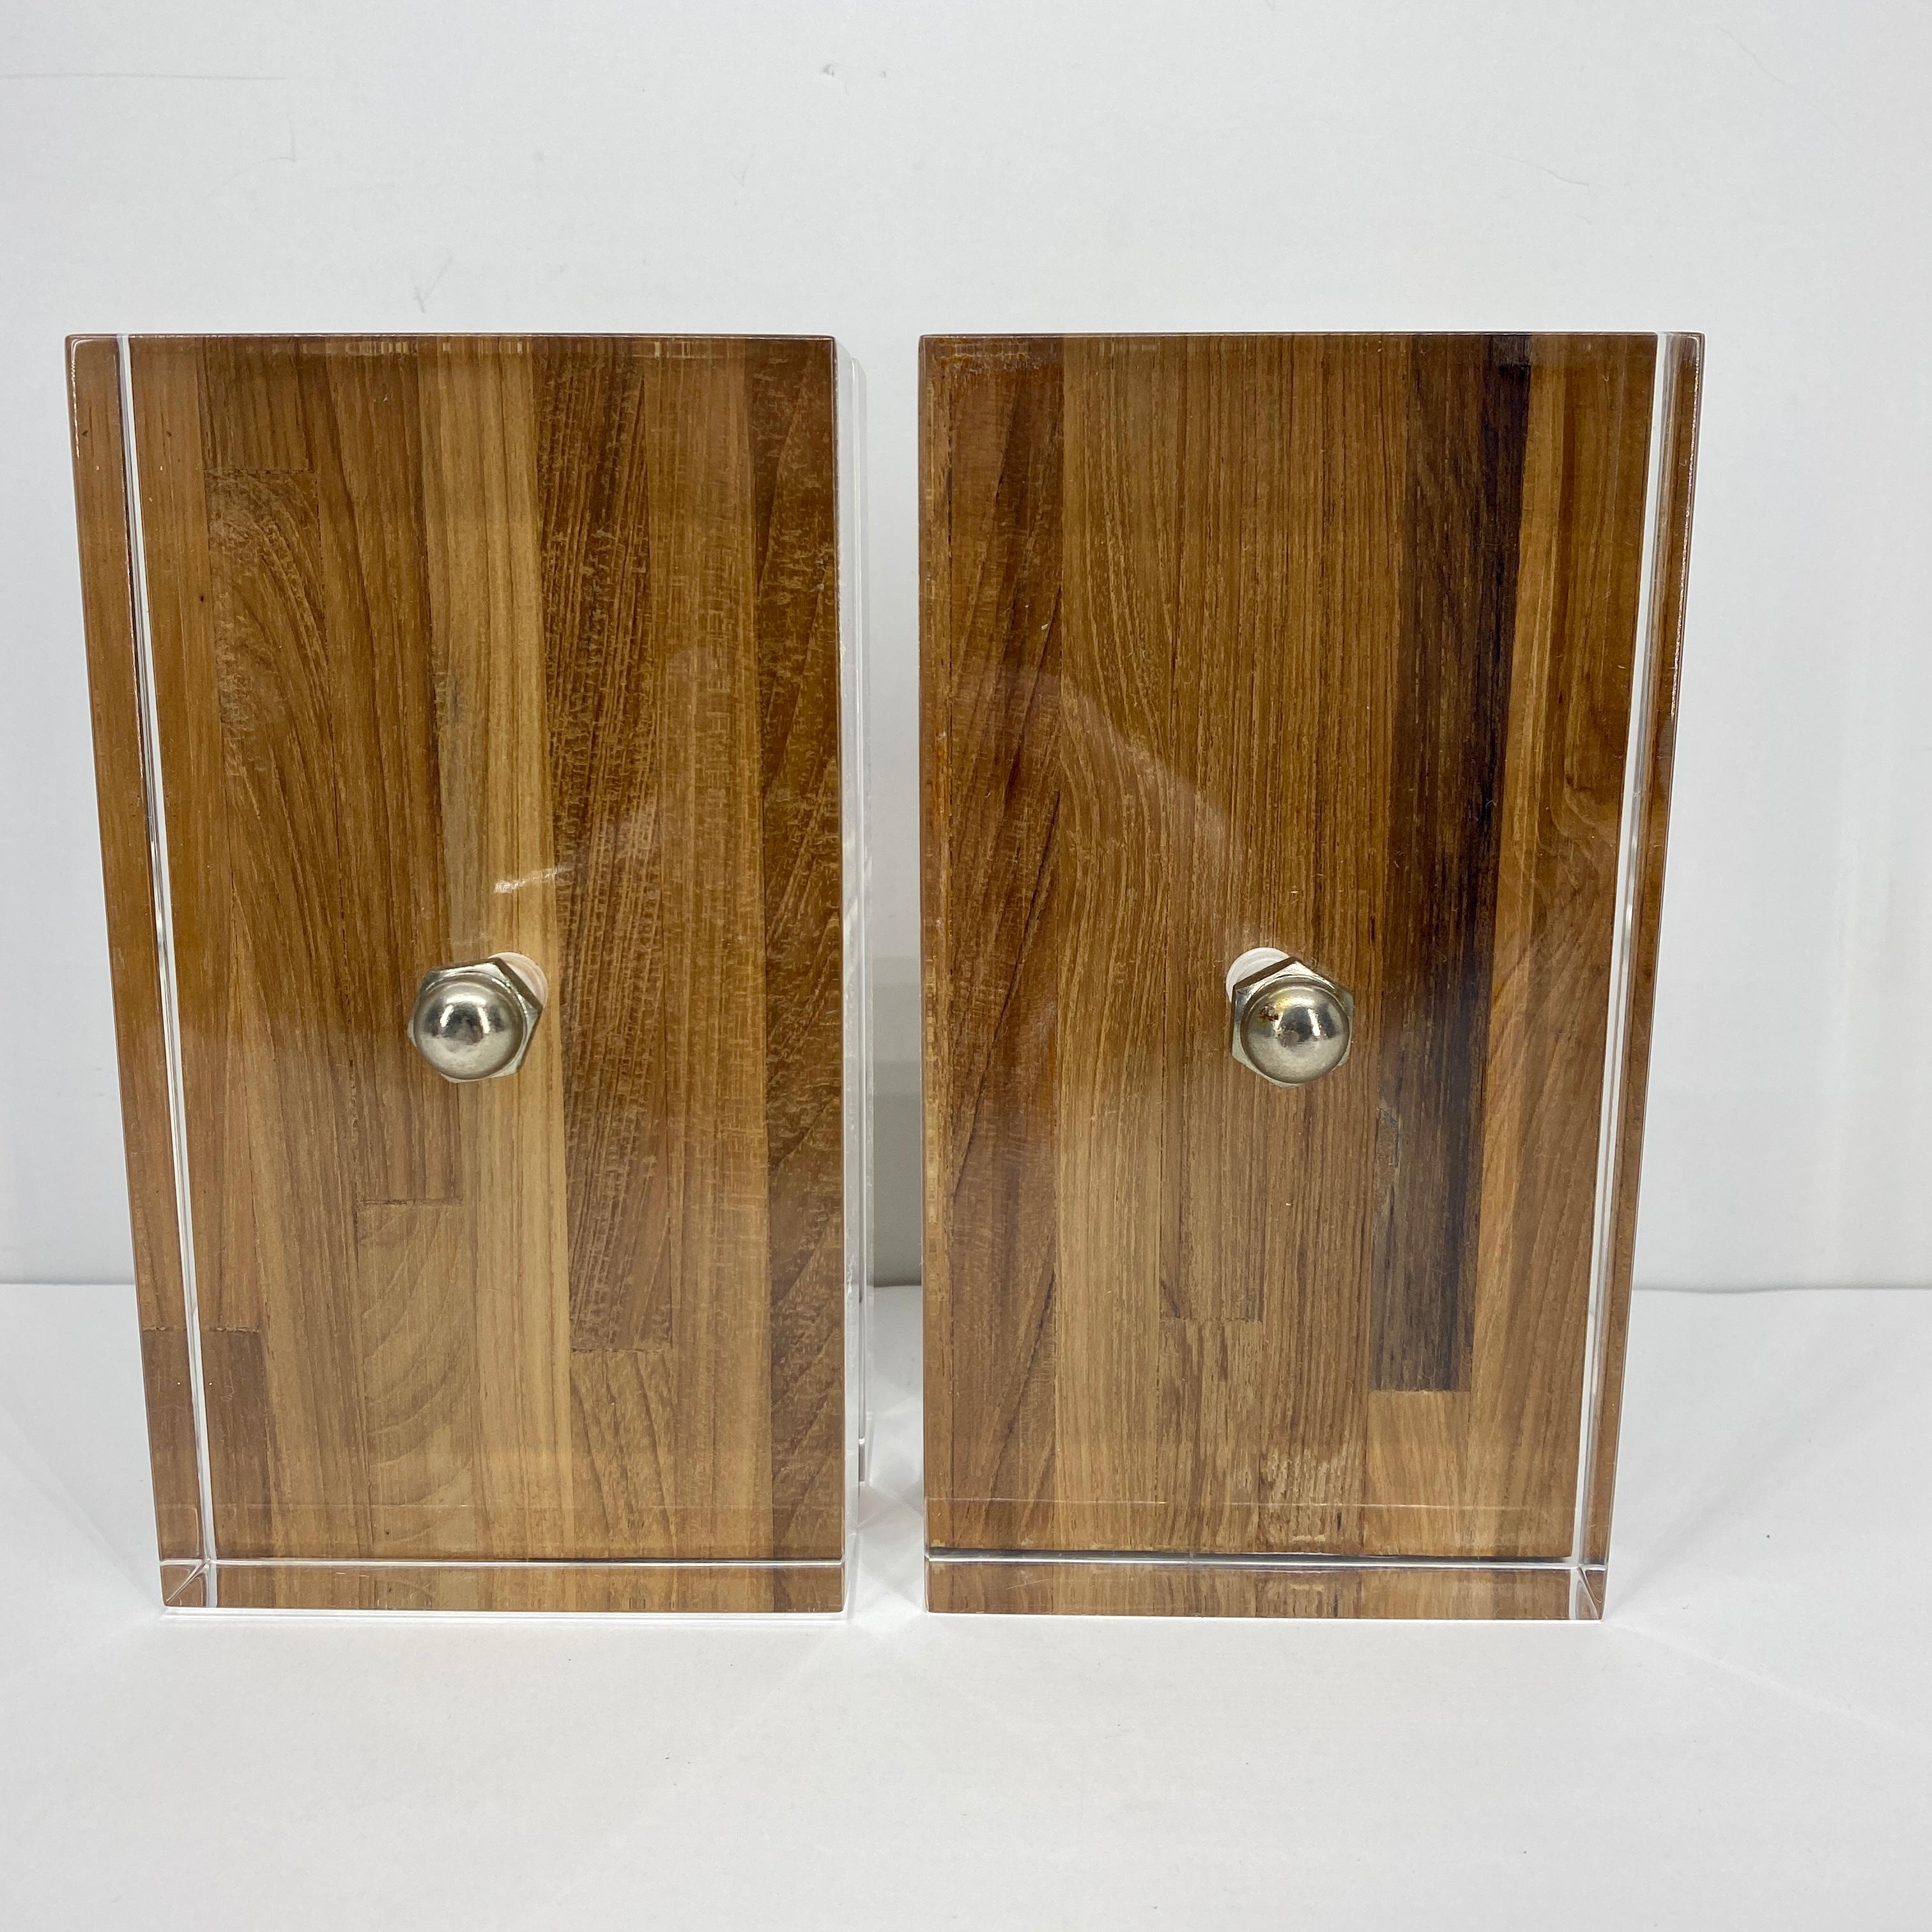 20th Century Vintage Mid-Century Modern Wood and Lucite Bookends by Herb Ritts